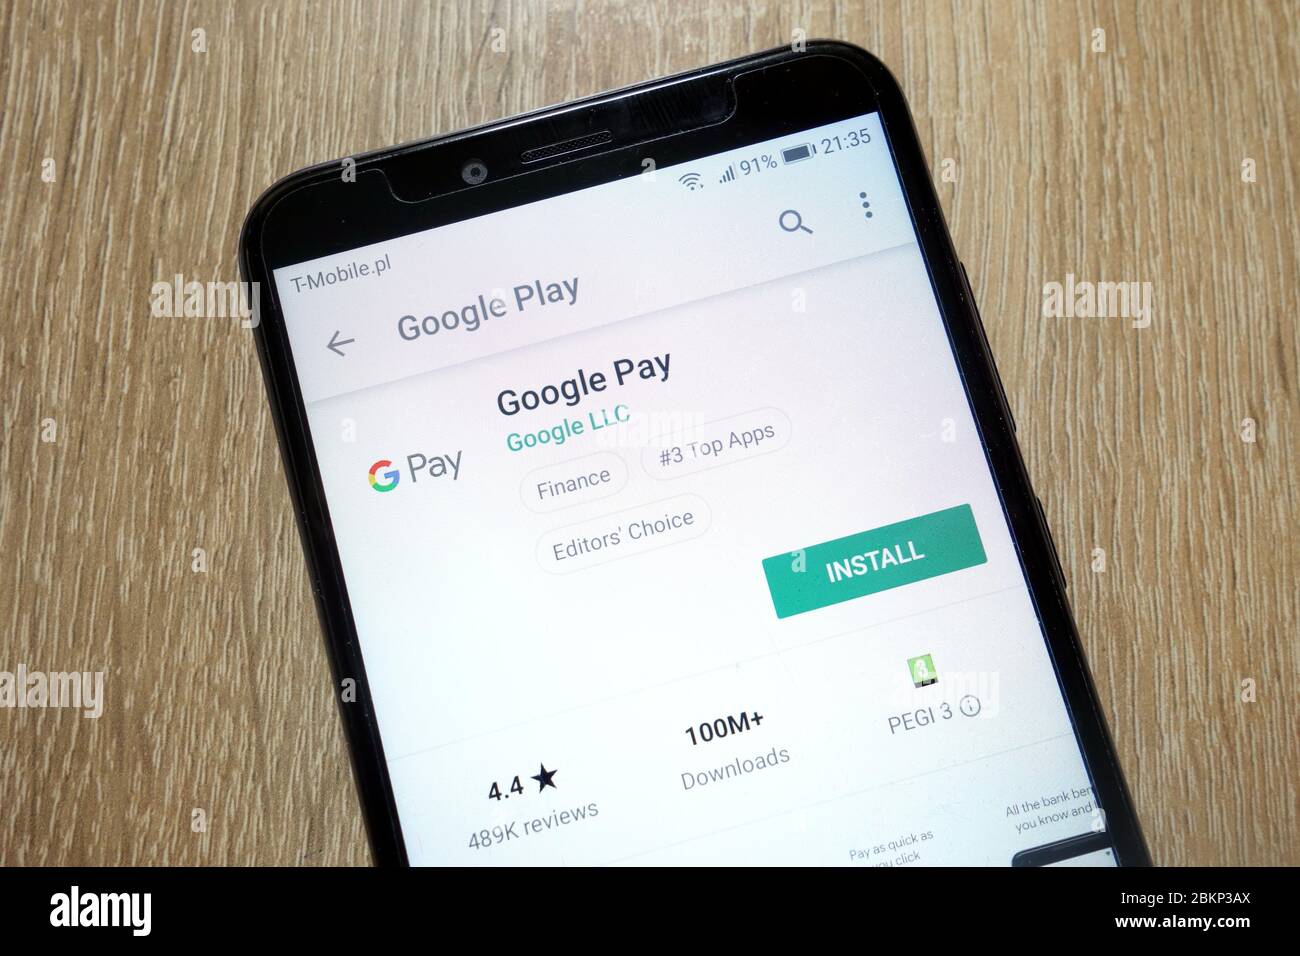 Google Pay app on Google Play Store website displayed on smartphone Stock Photo